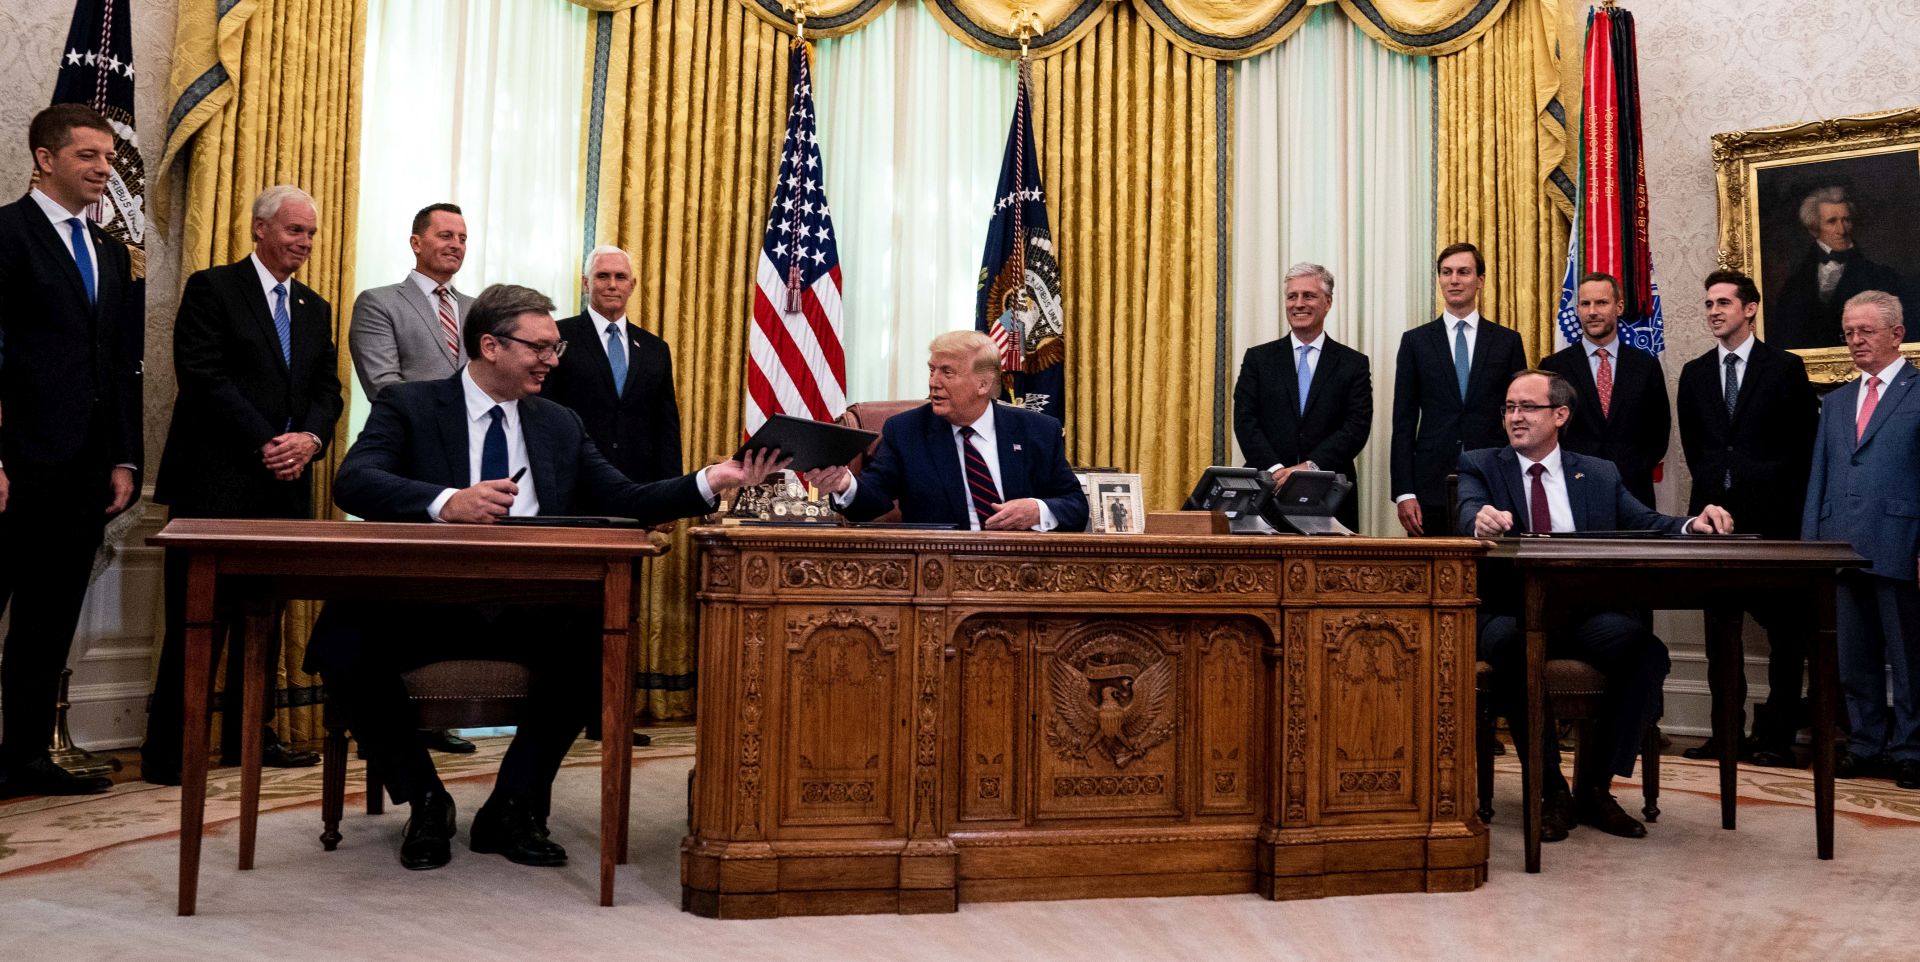 epa08646873 US President Donald J. Trump (C) participates in a signing ceremony and trilateral meeting with the President of the Republic of Serbia, Aleksandar Vucic (L), and the Prime Minister of the Republic of Kosovo, Avdullah Hoti (R), at the White House, in Washington, DC, USA, on 04 September 2020.  EPA/ANNA MONEYMAKER / POOL